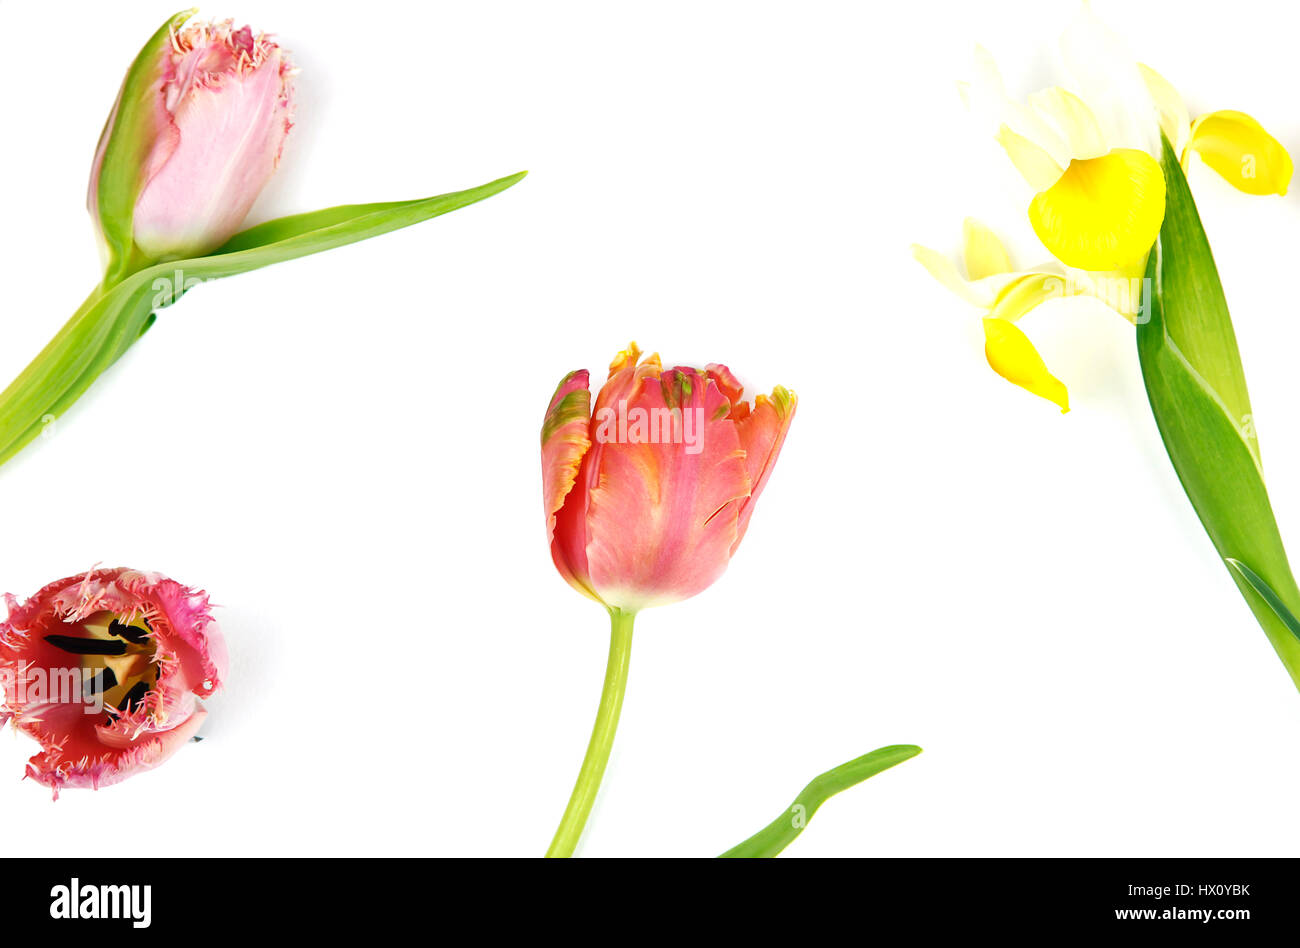 Plants, Flowers, Studio shot of colourful cut Tulip stems against white background. Stock Photo